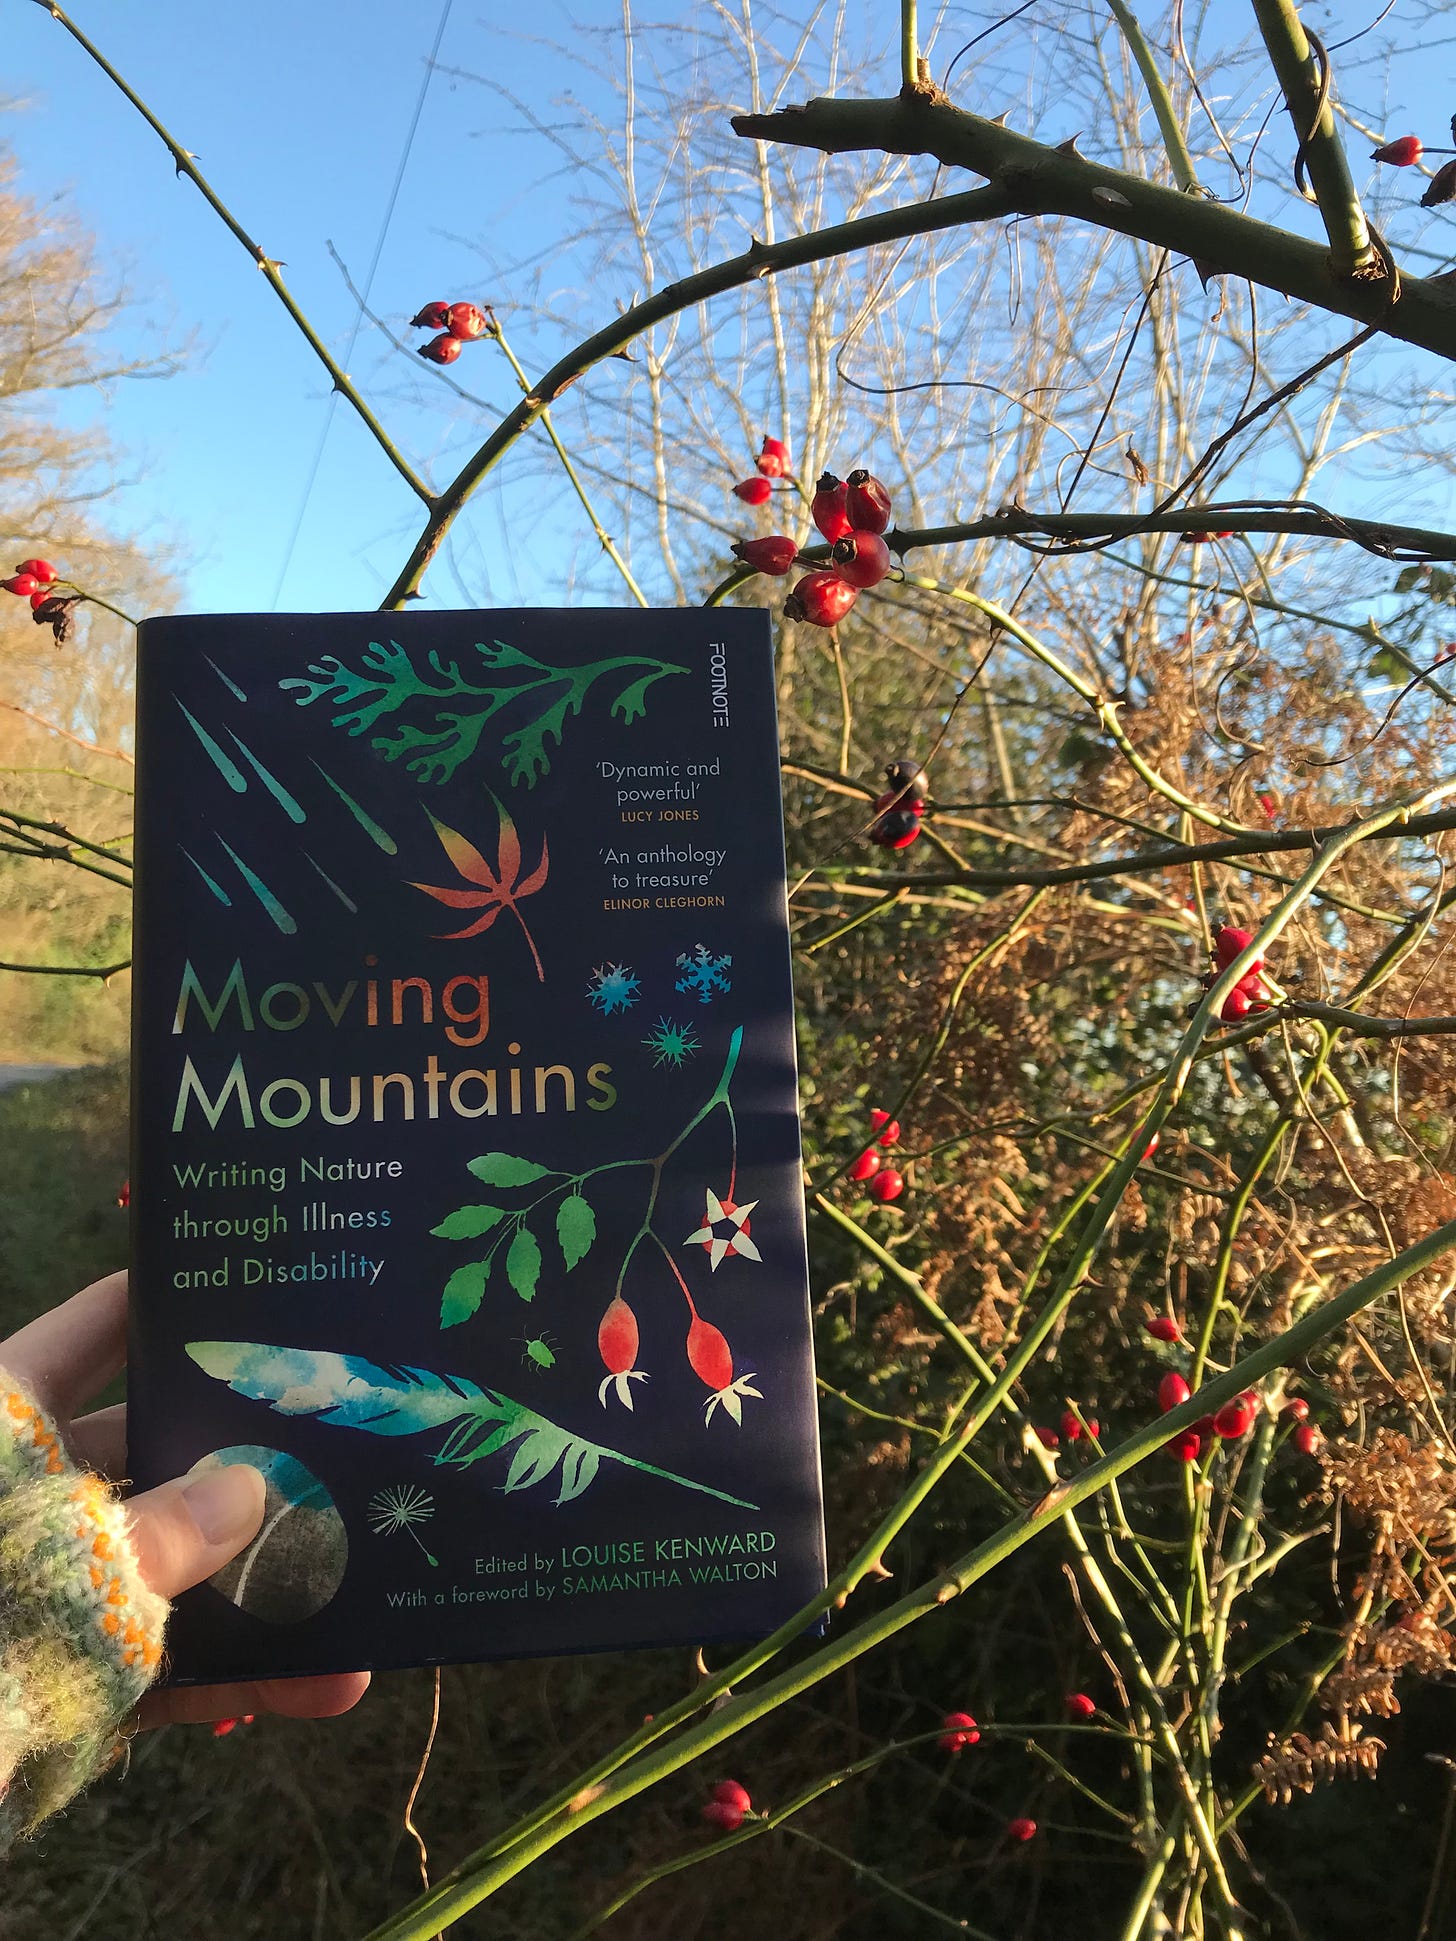 Moving Mountains held up in front of hedgerow with rosehips and blue skies.